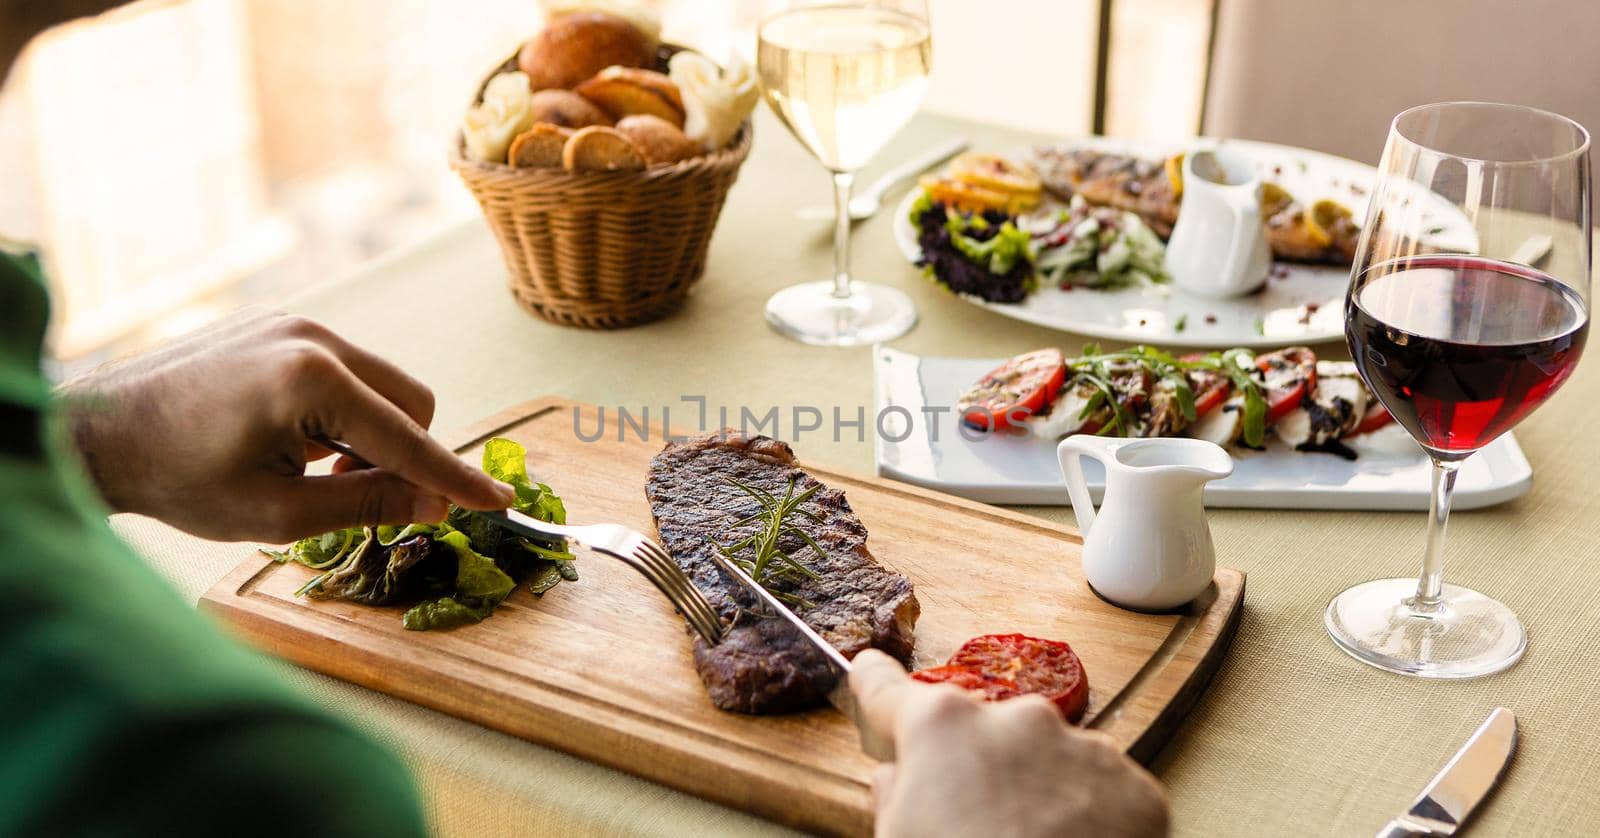 Man cutting tasty steak with sauce, salad on the table by ferhad